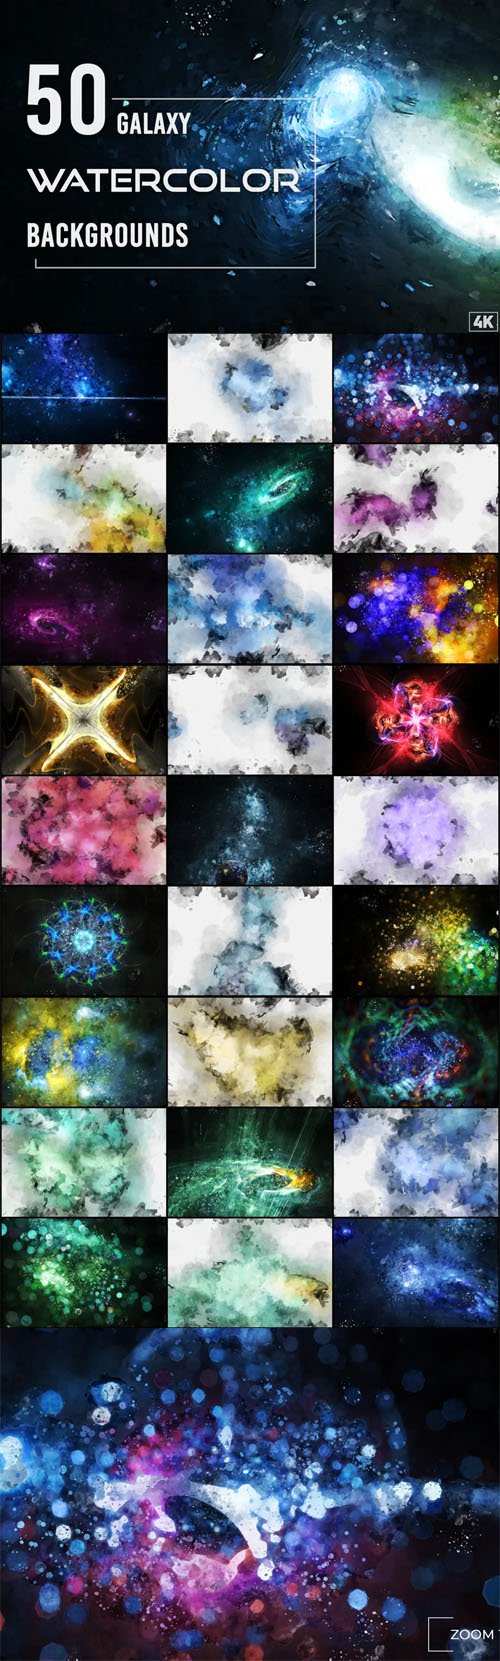 50 Realistic Galaxy Watercolor Backgrounds Collection